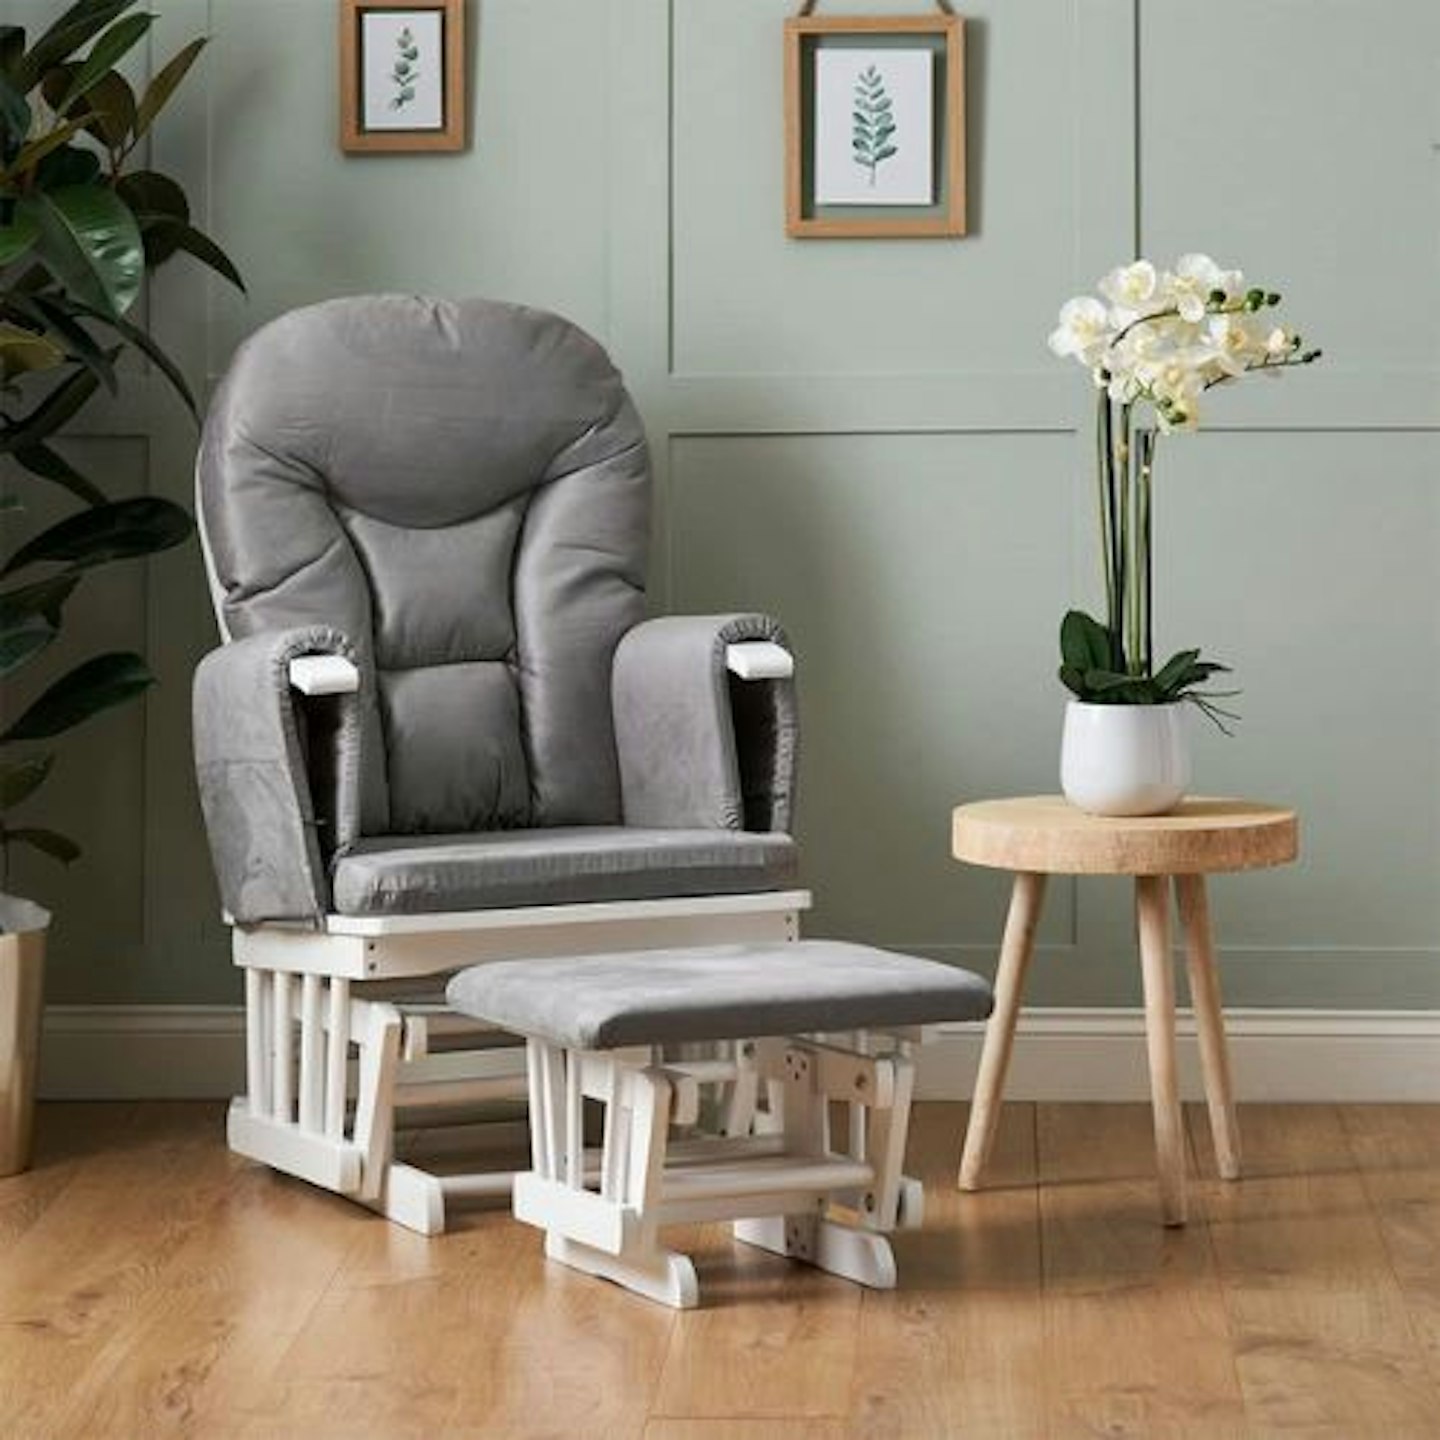 The 11 Best Nursery Rocking Chairs and Gliders of 2023